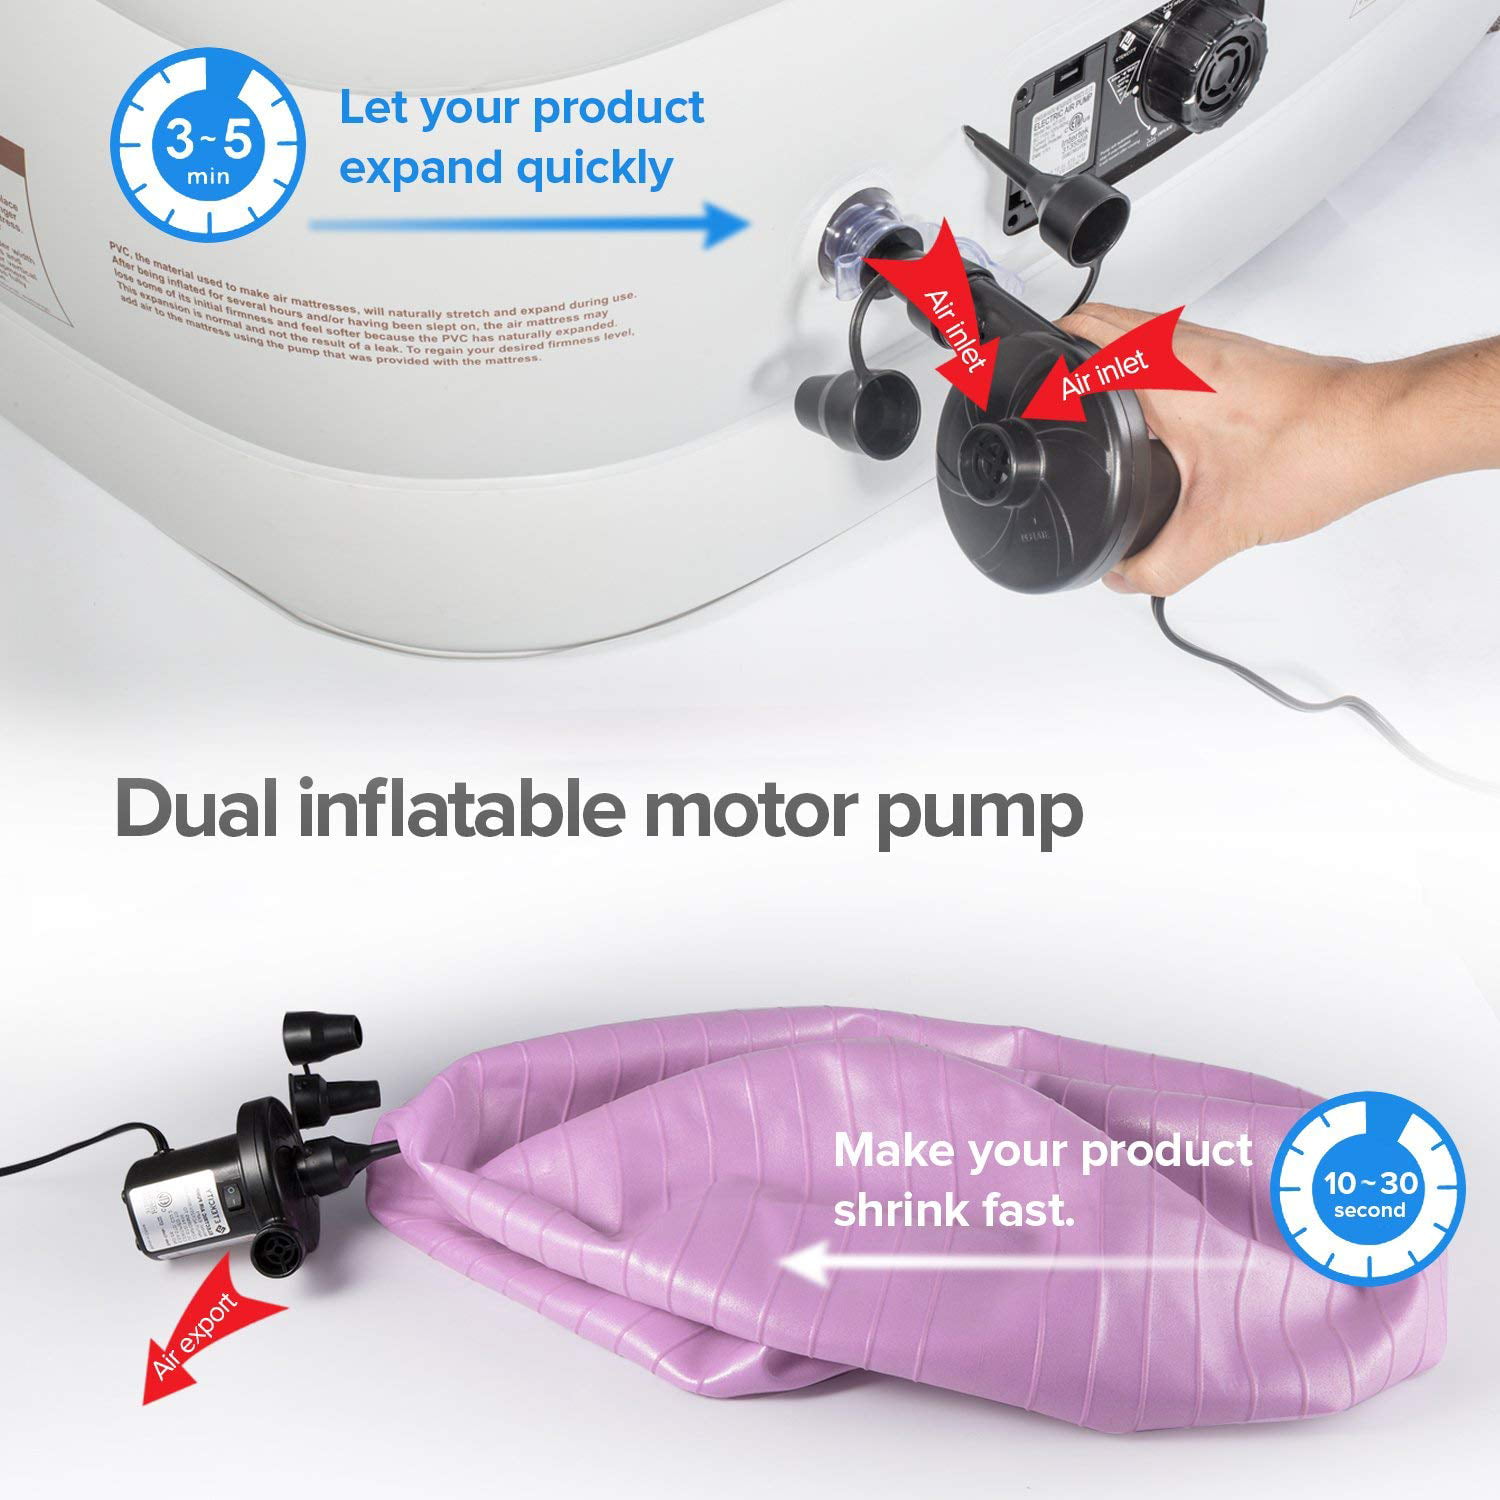 Air Pump Air Mattress Pump for Inflatable Blow up Pool Raft Bed Boat Toy Exercise Ball,Quick-Fill AC Inflator Deflator with Nozzles,110-120V